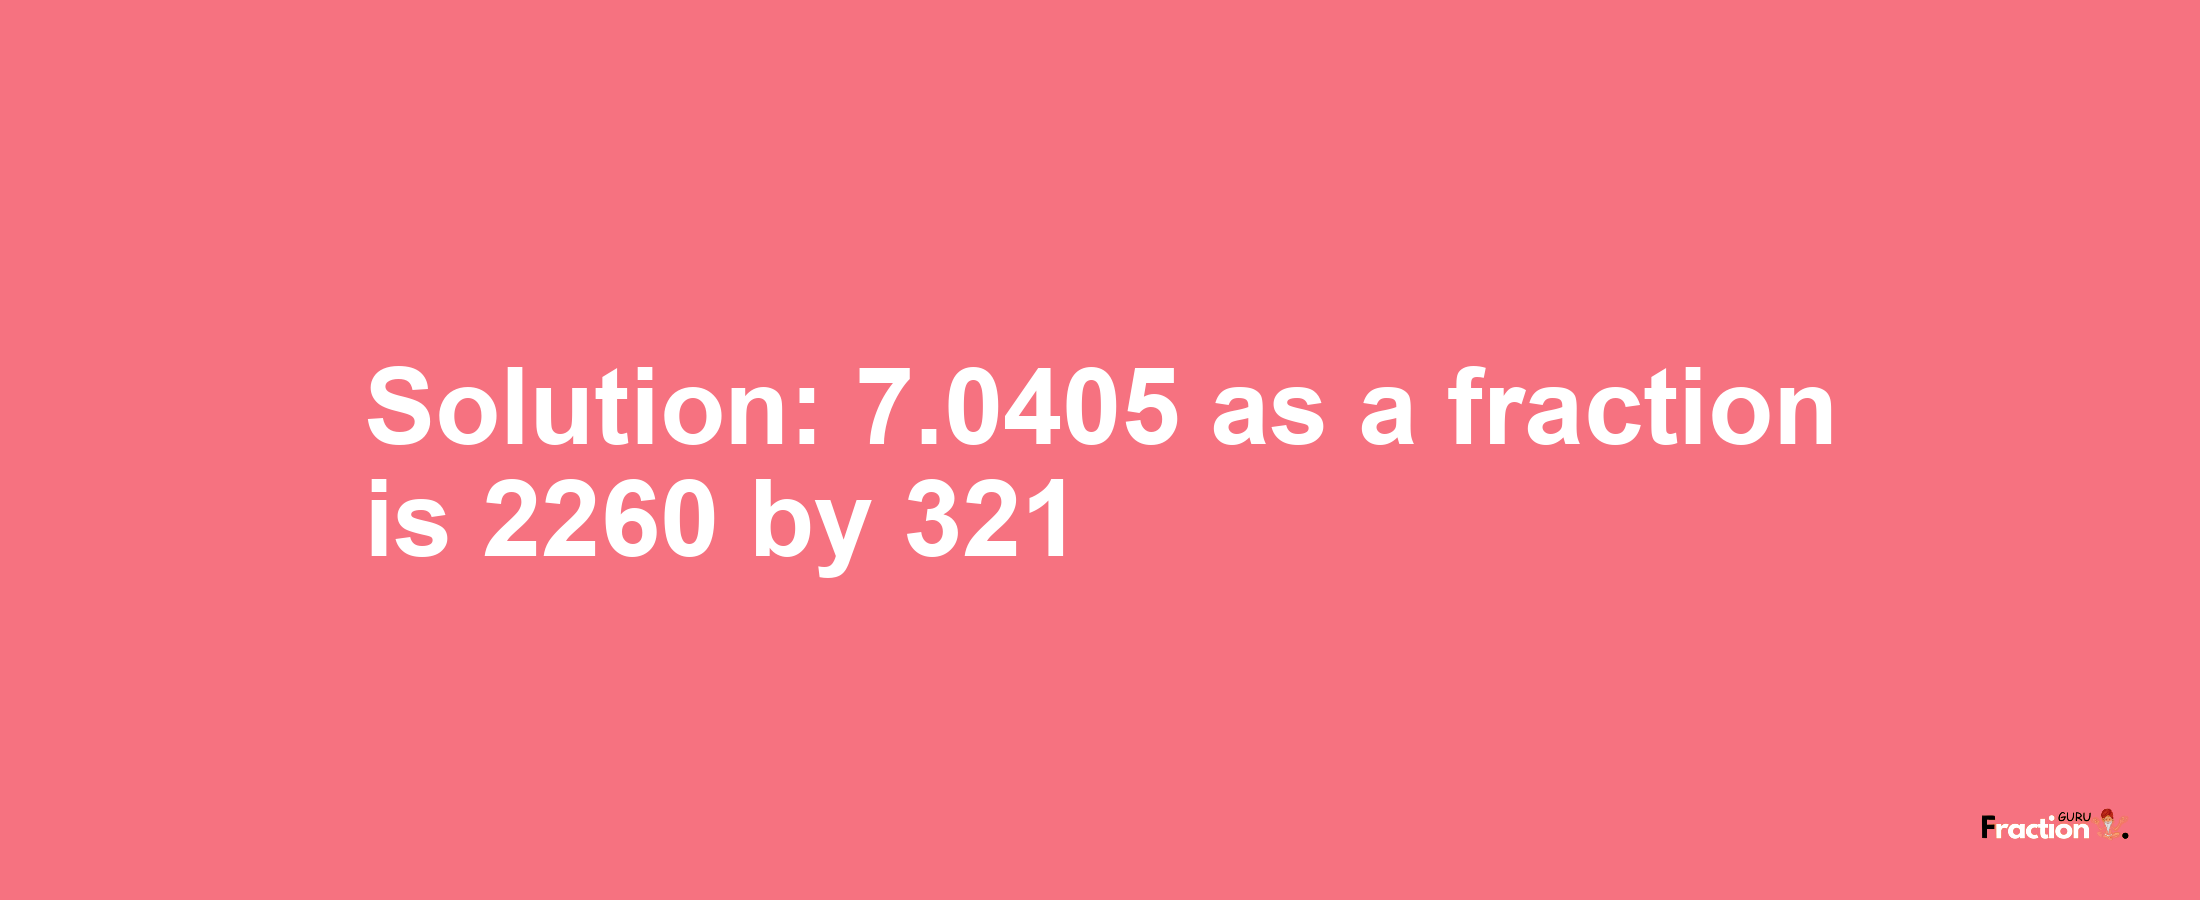 Solution:7.0405 as a fraction is 2260/321